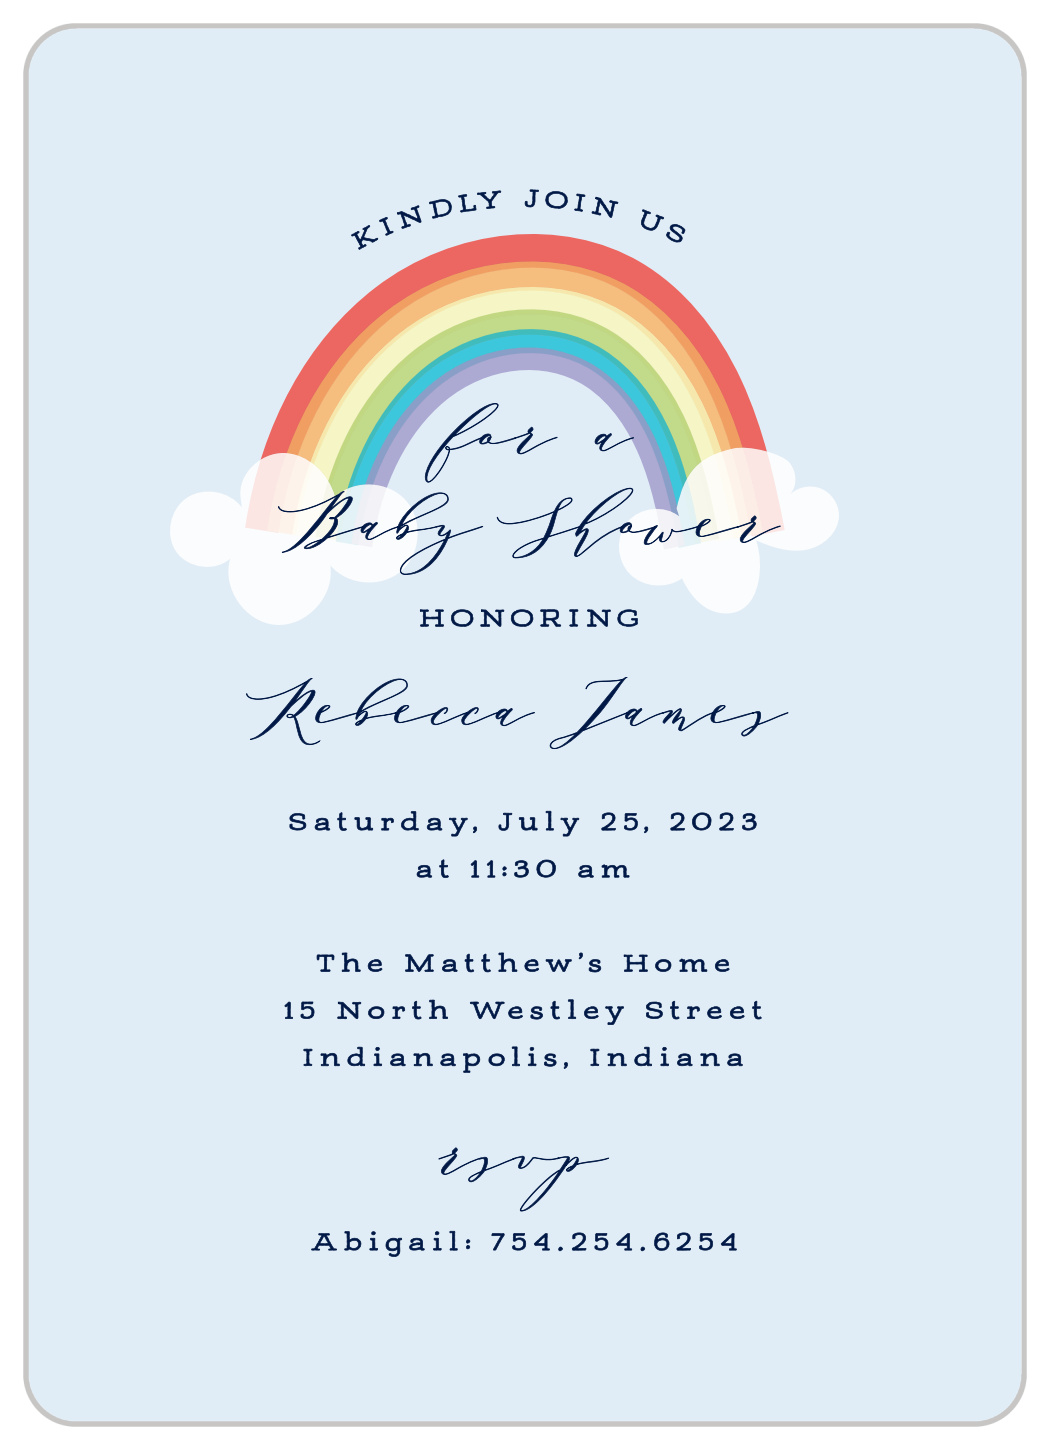 joint baby shower invitations